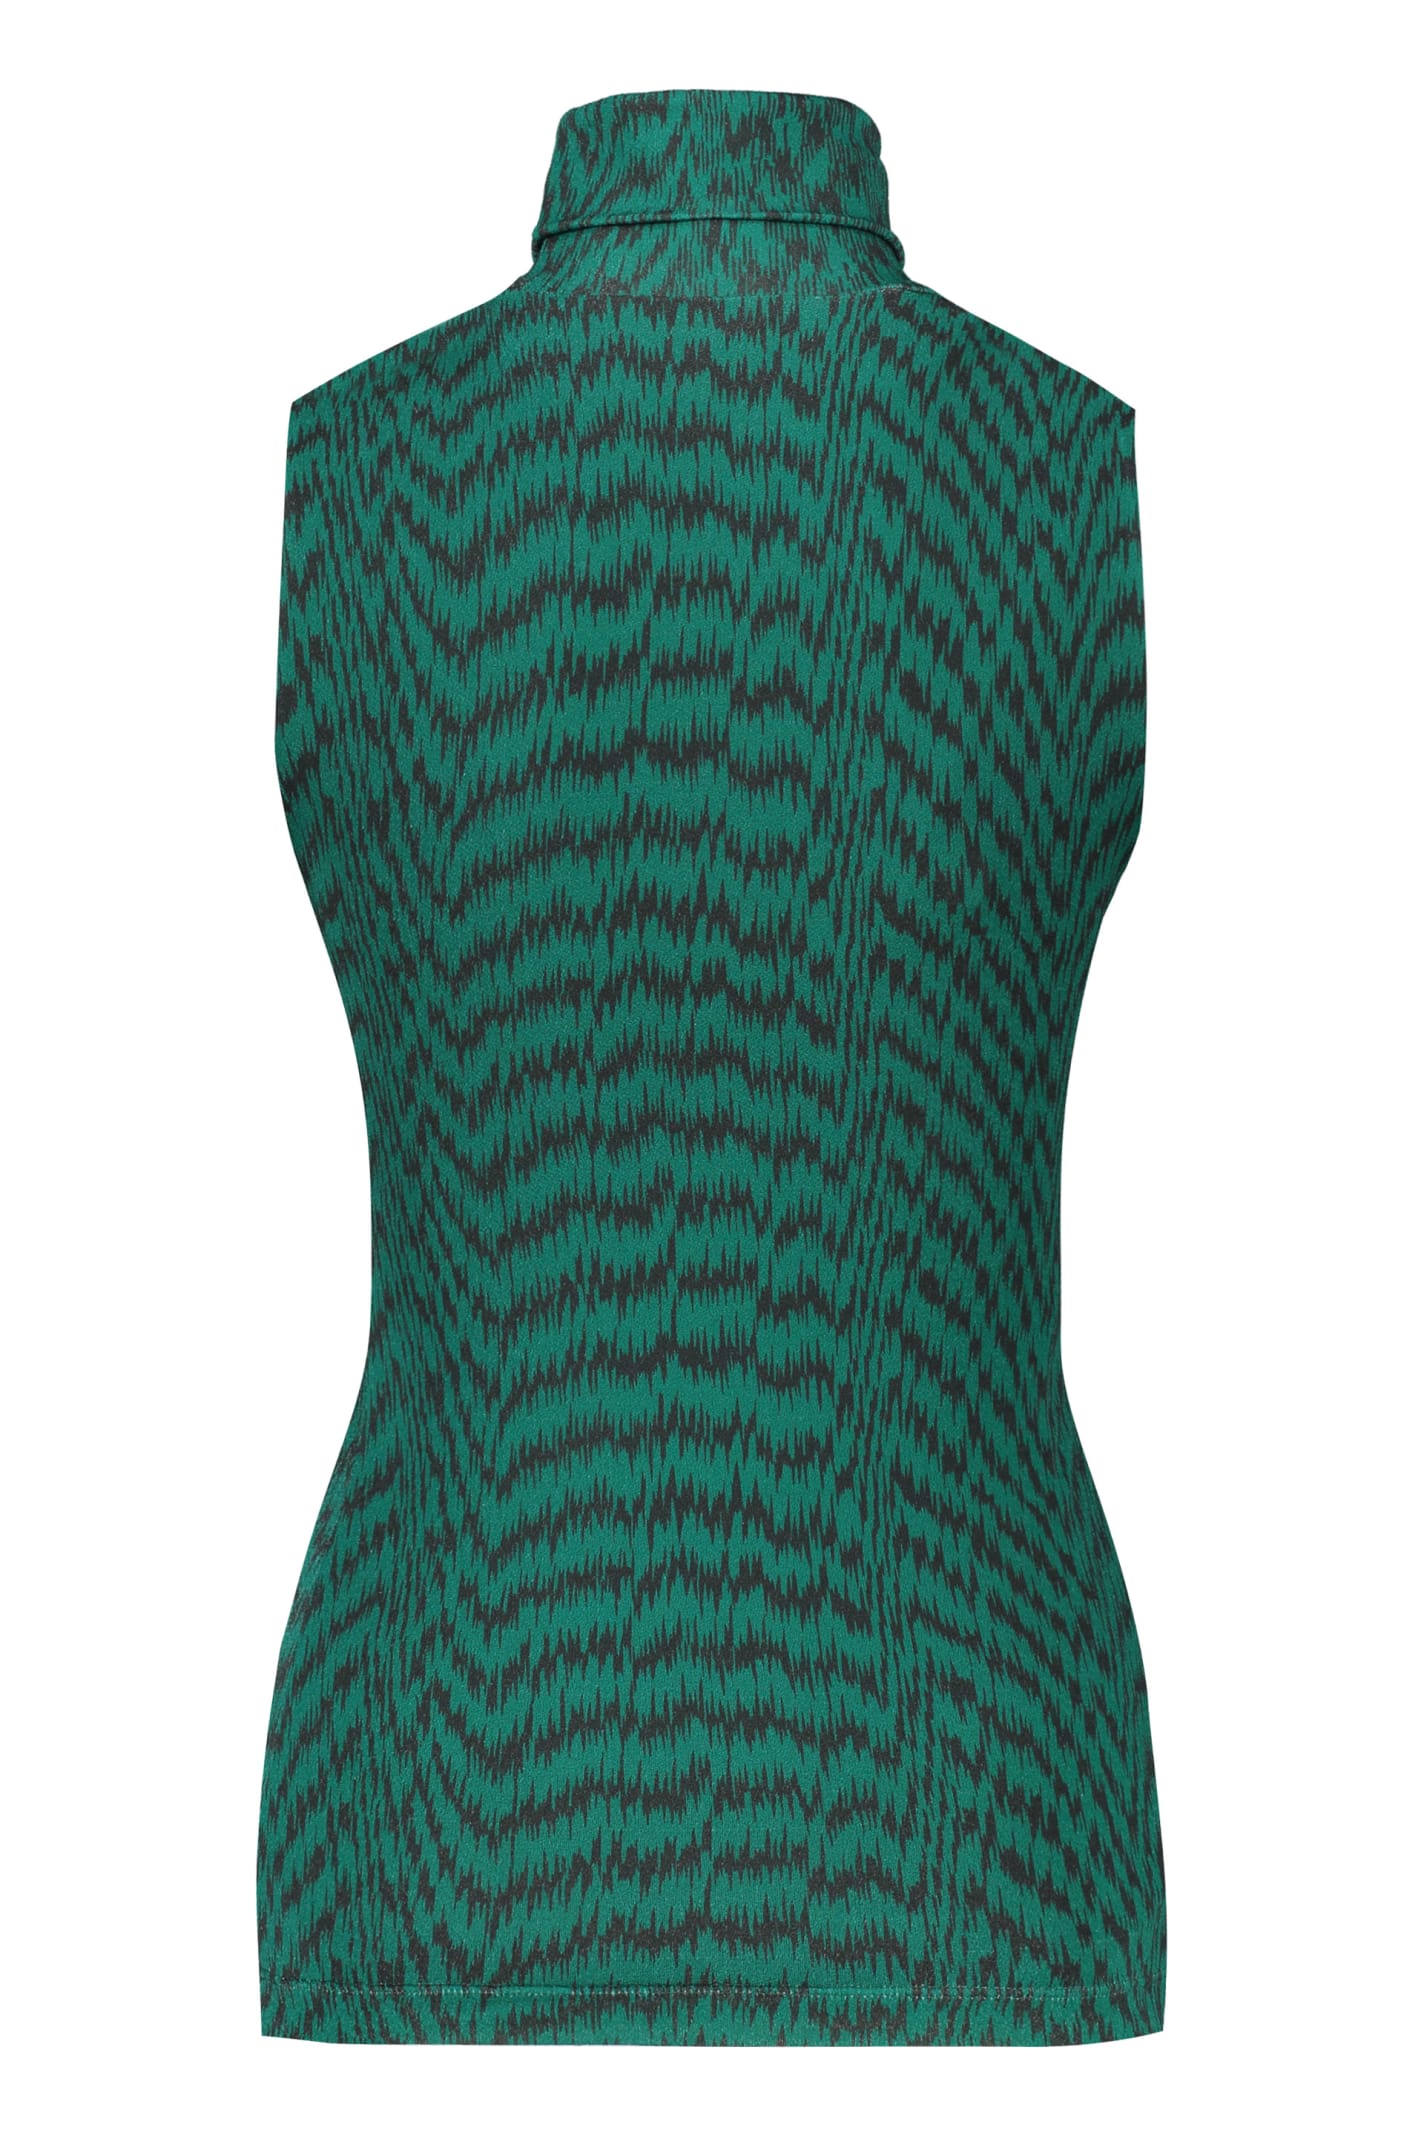 Shop Missoni Technical Fabric Top In Green